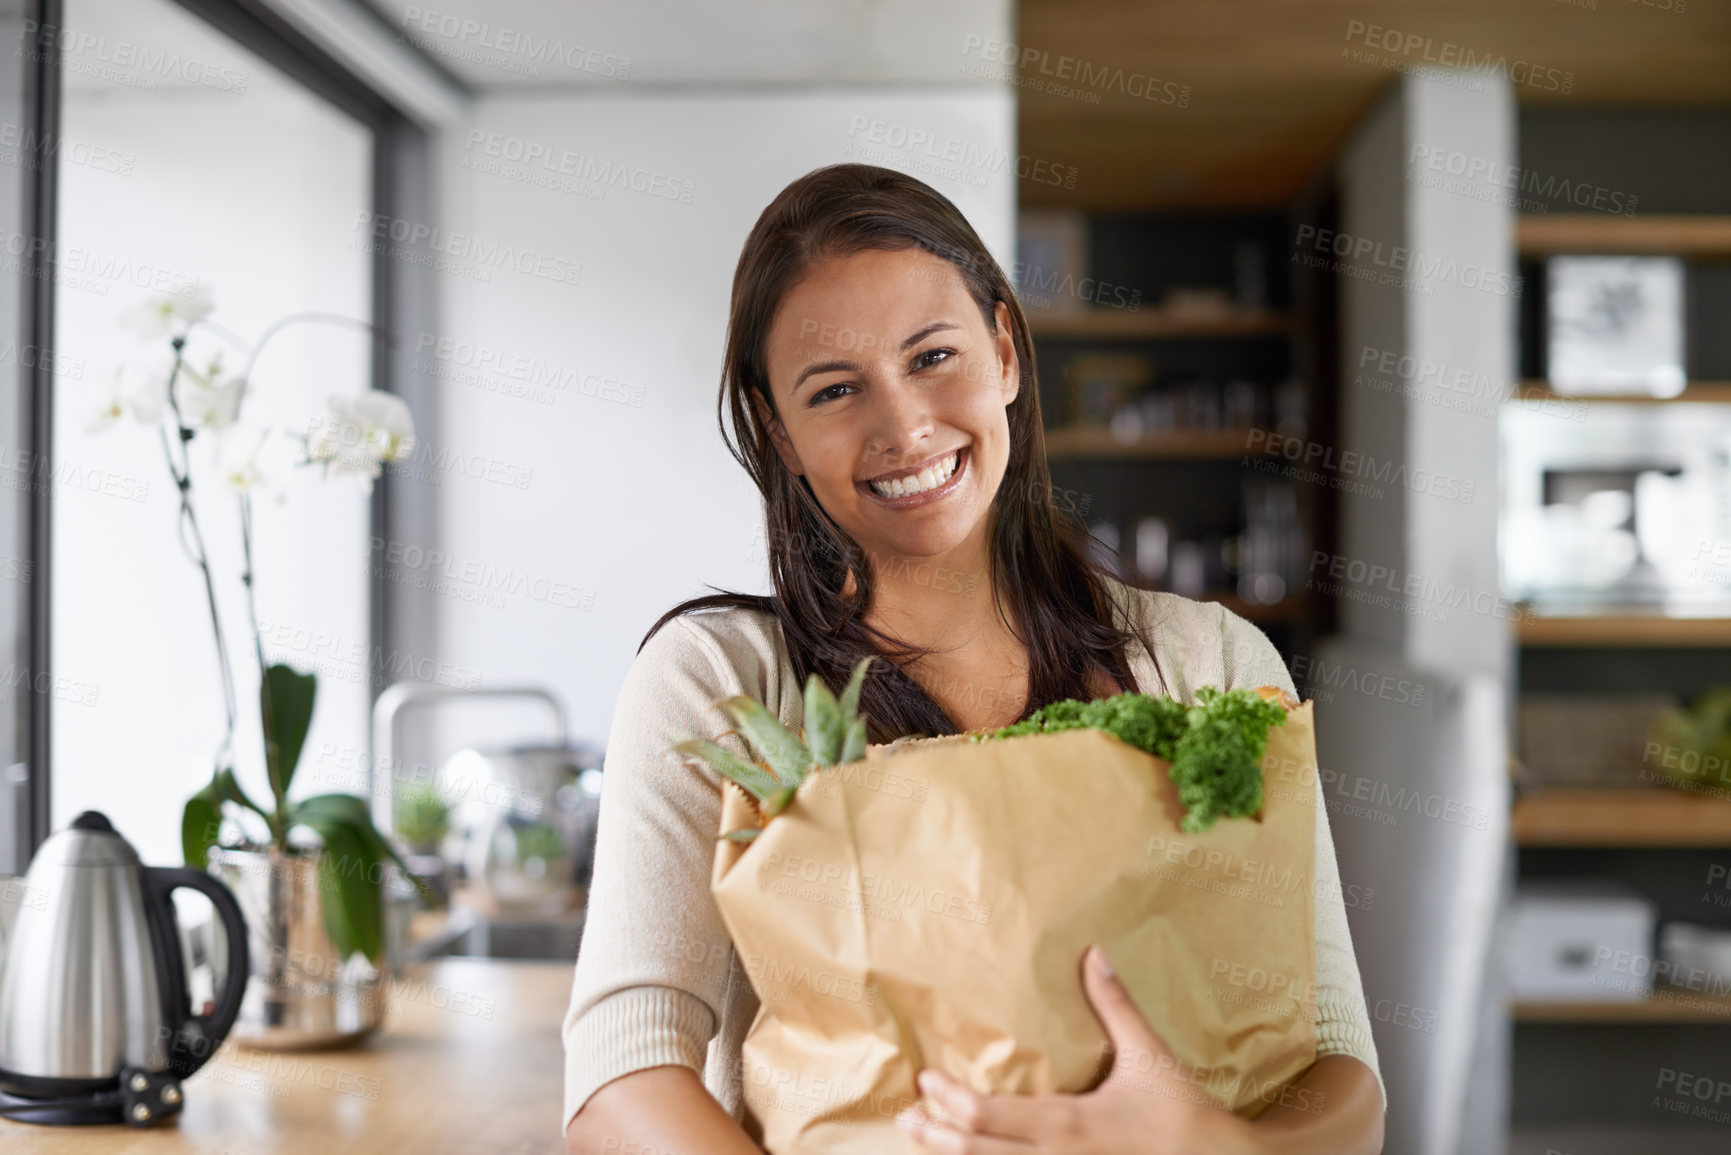 Buy stock photo A young woman standing in her kitchen holding a bag of groceries - portrait